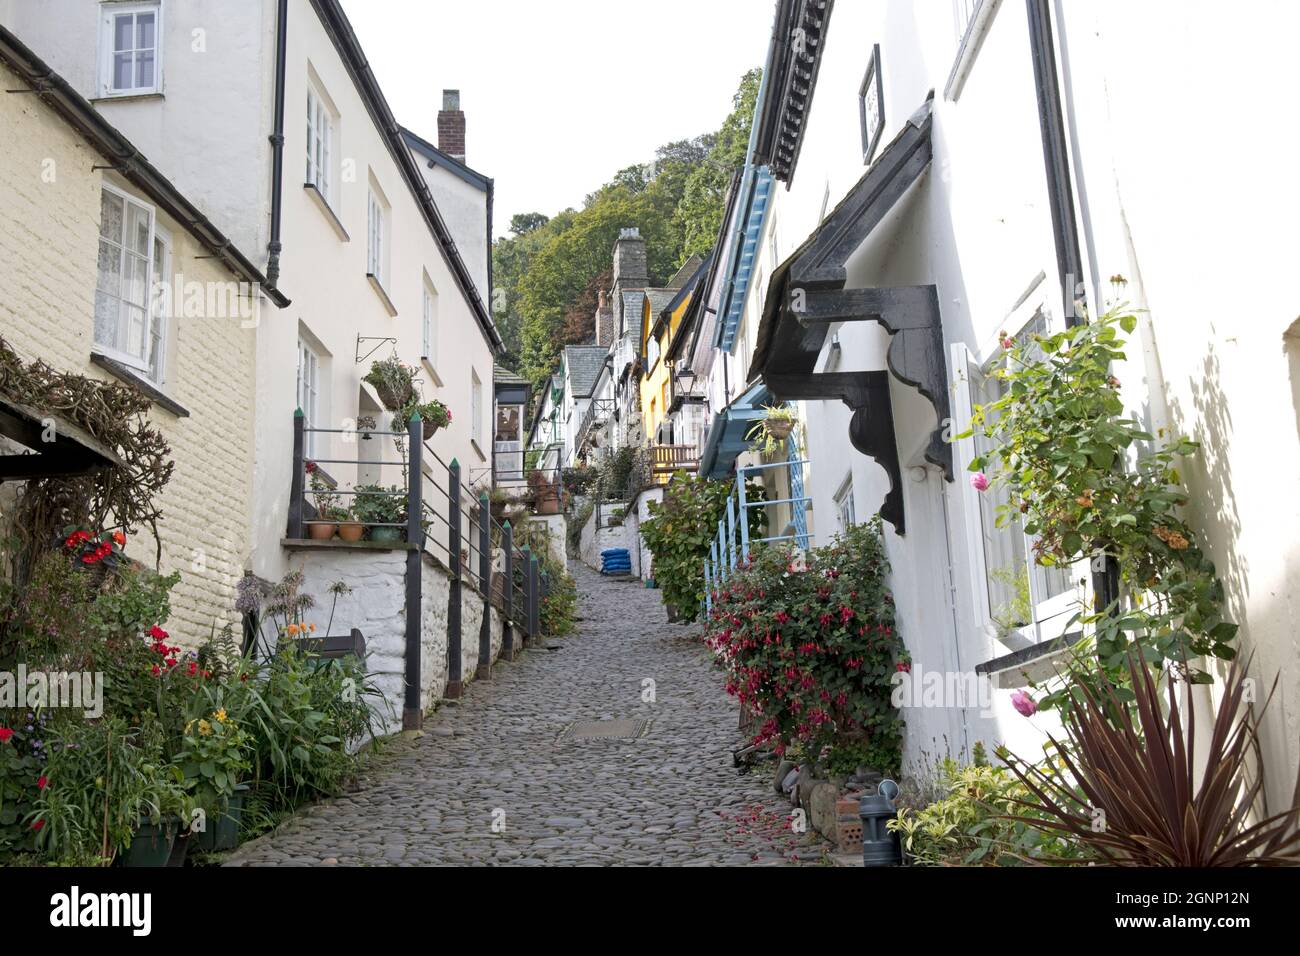 White cottages either side of the cobbled street built from pebbles from the beach in the ancient village of Clovelly where Charles Kingsley lived as Stock Photo